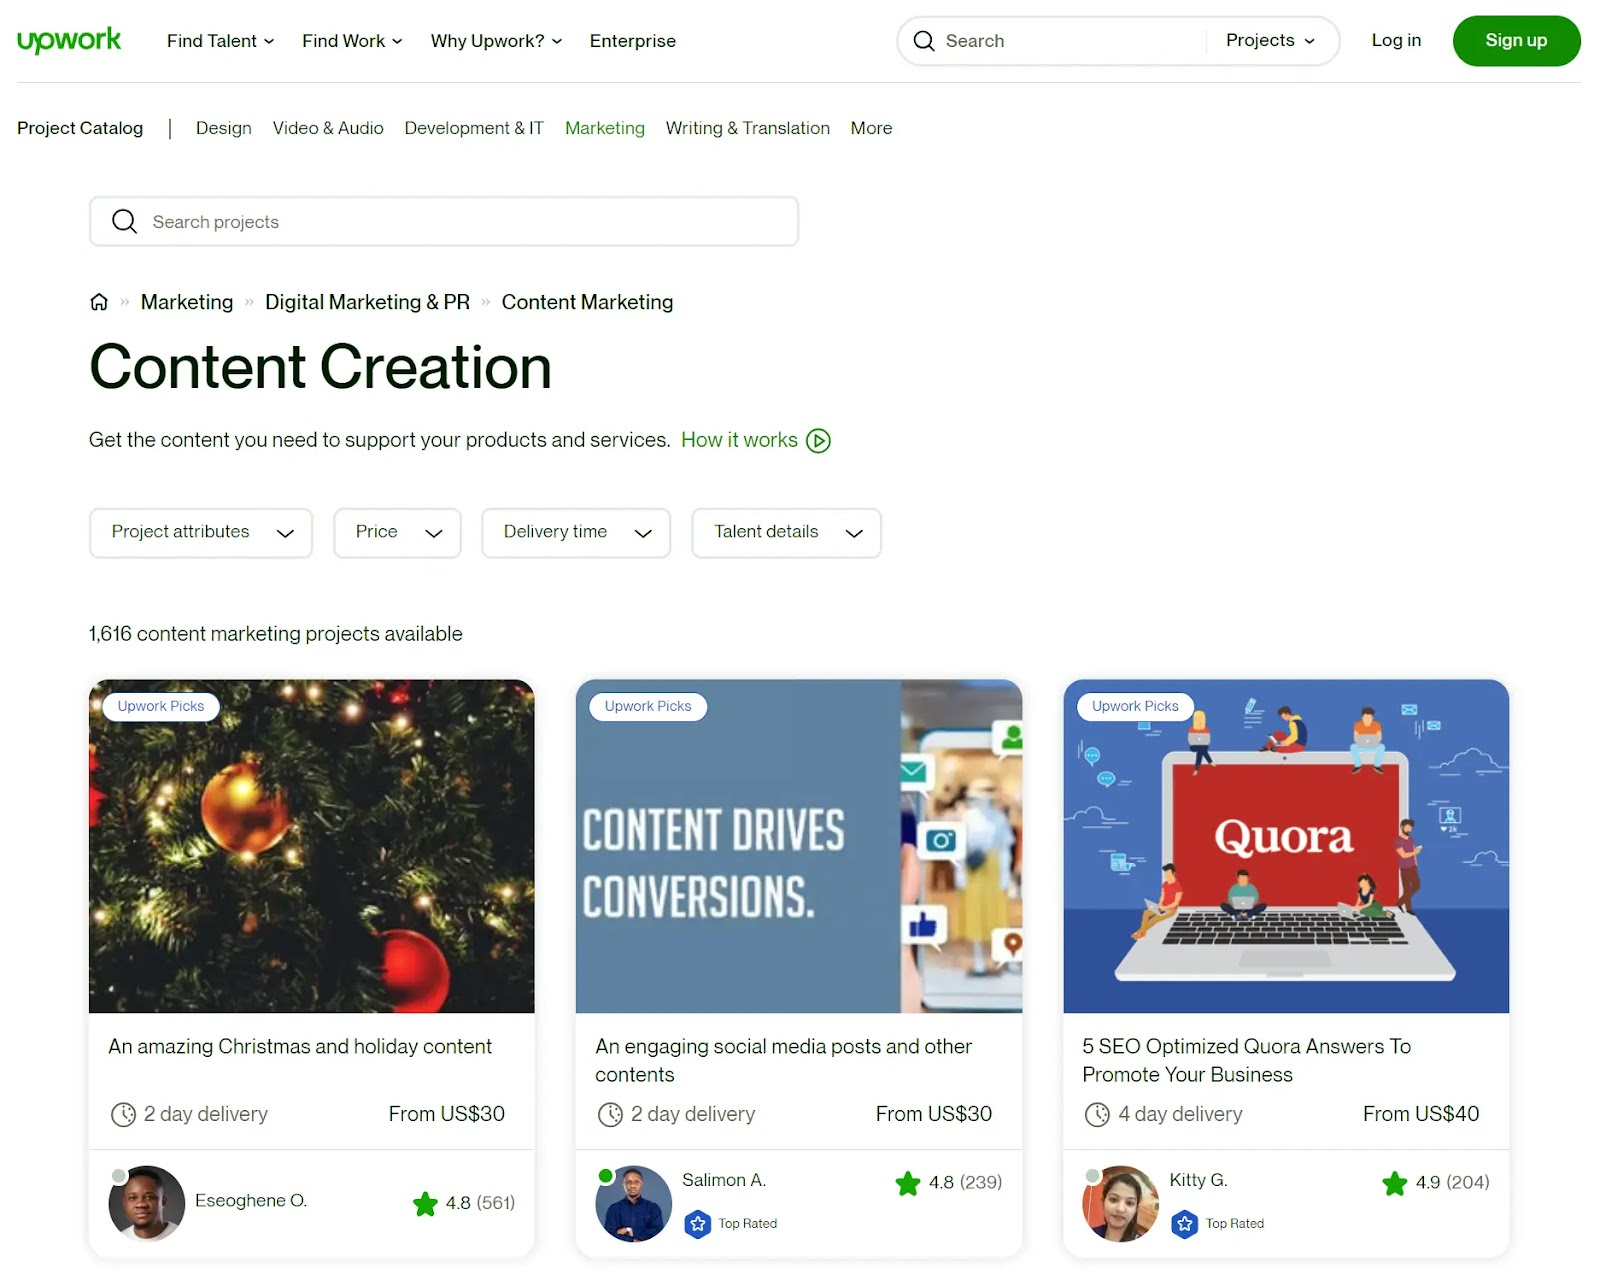 "Content Creation" results on Upwork